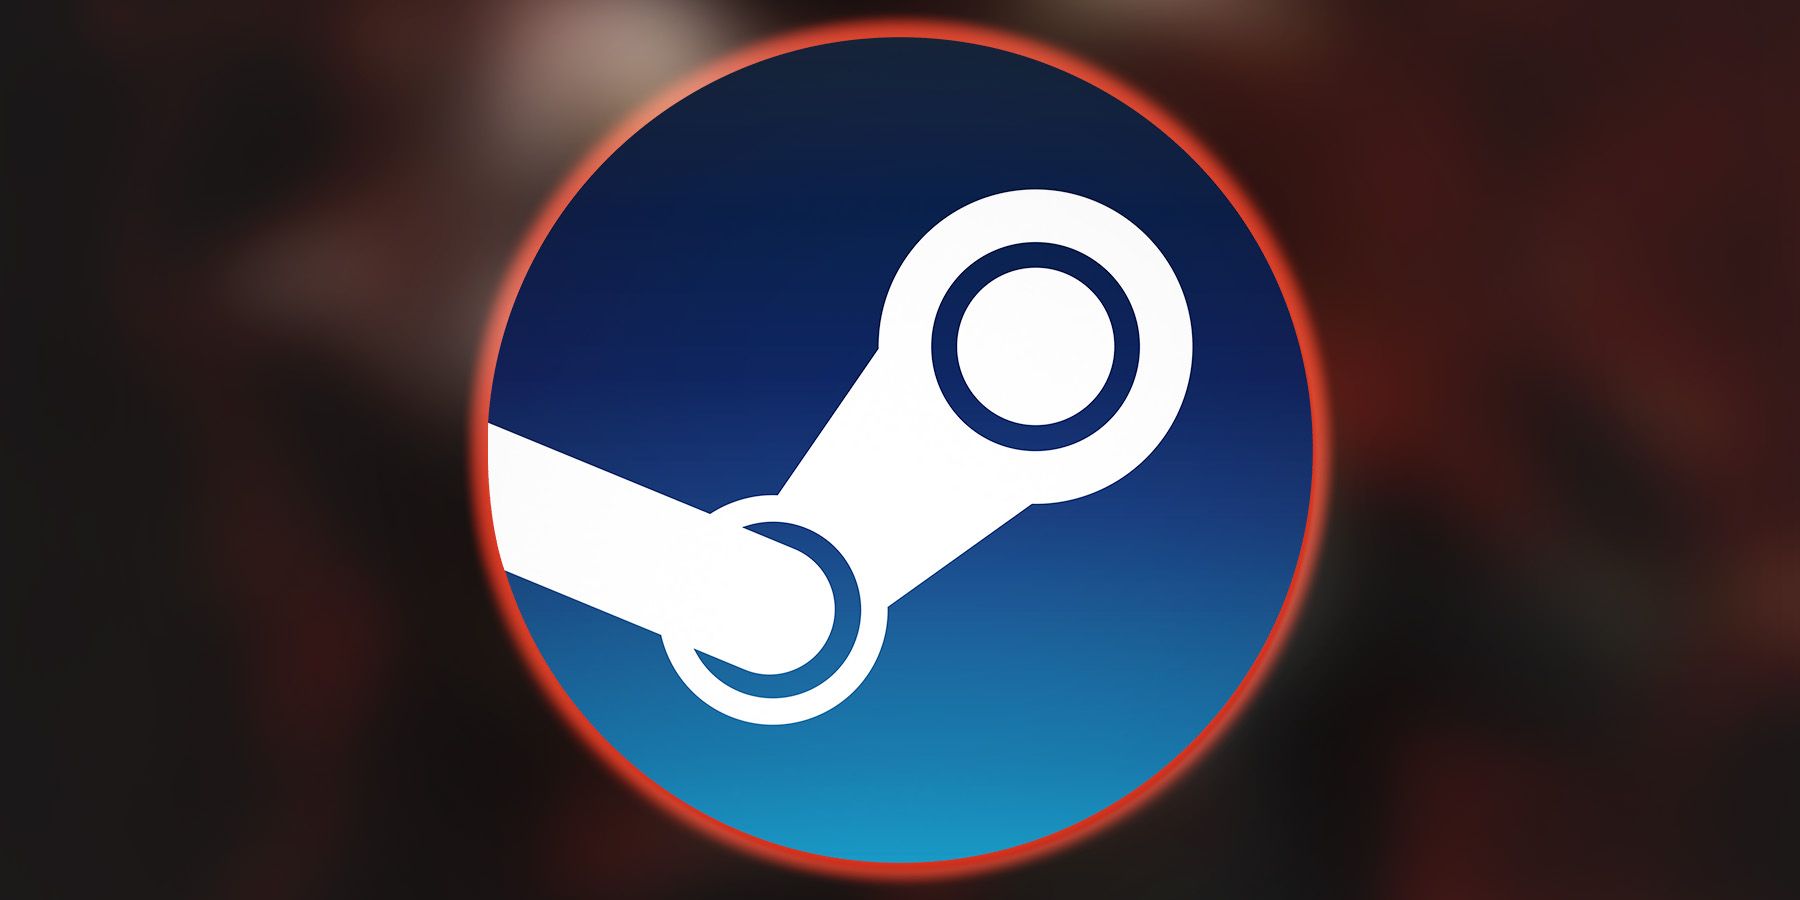 Steam logo with red outer glow on blurred Darkest Dungeon cover artwork